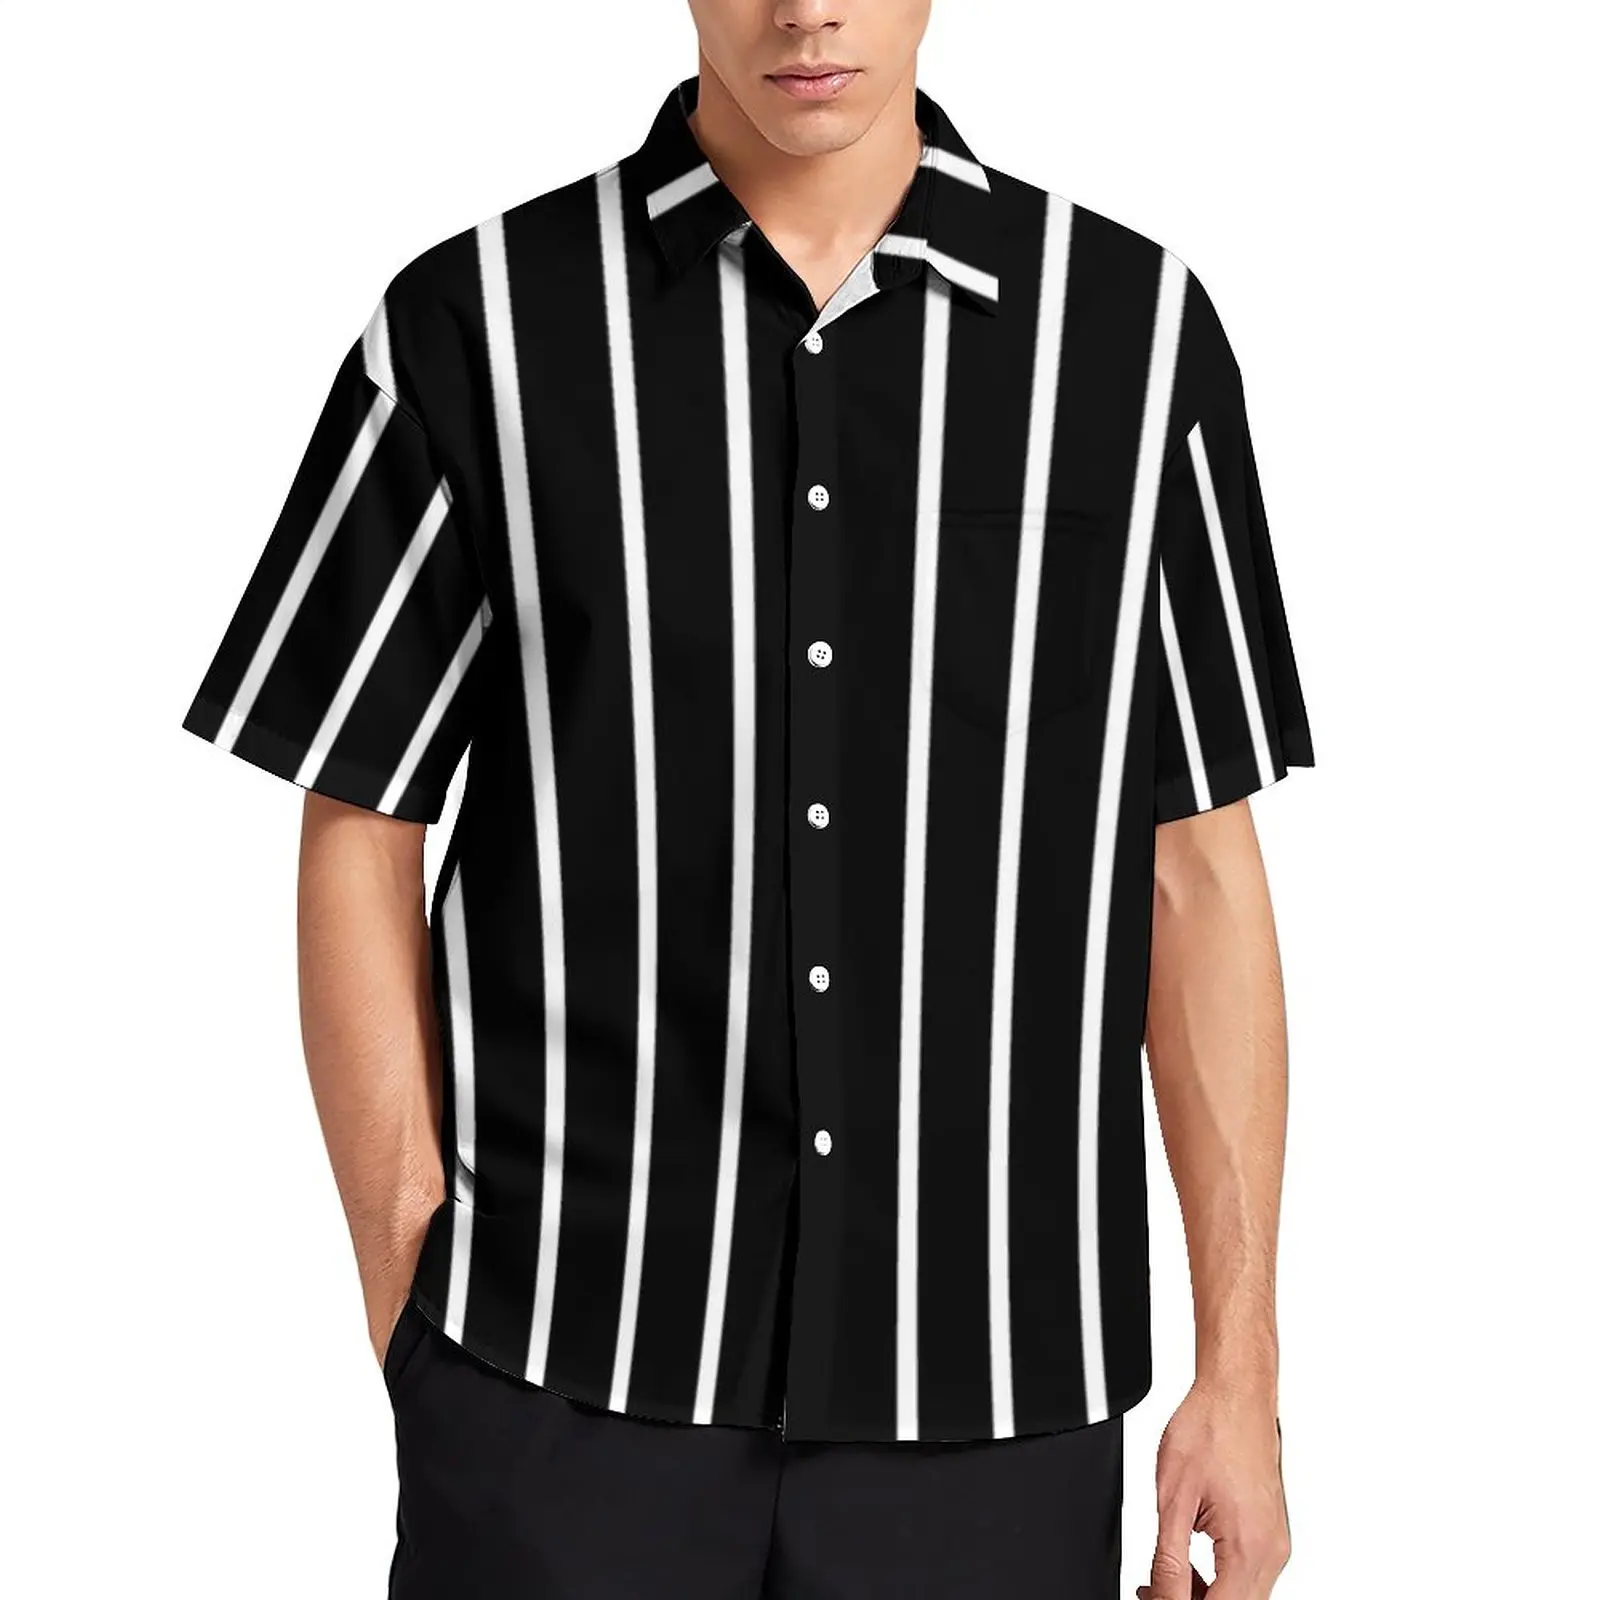 

Vertical Striped Loose Shirt Man Vacation Black And White Lines Casual Shirts Hawaiian Short Sleeve Aesthetic Oversized Blouses